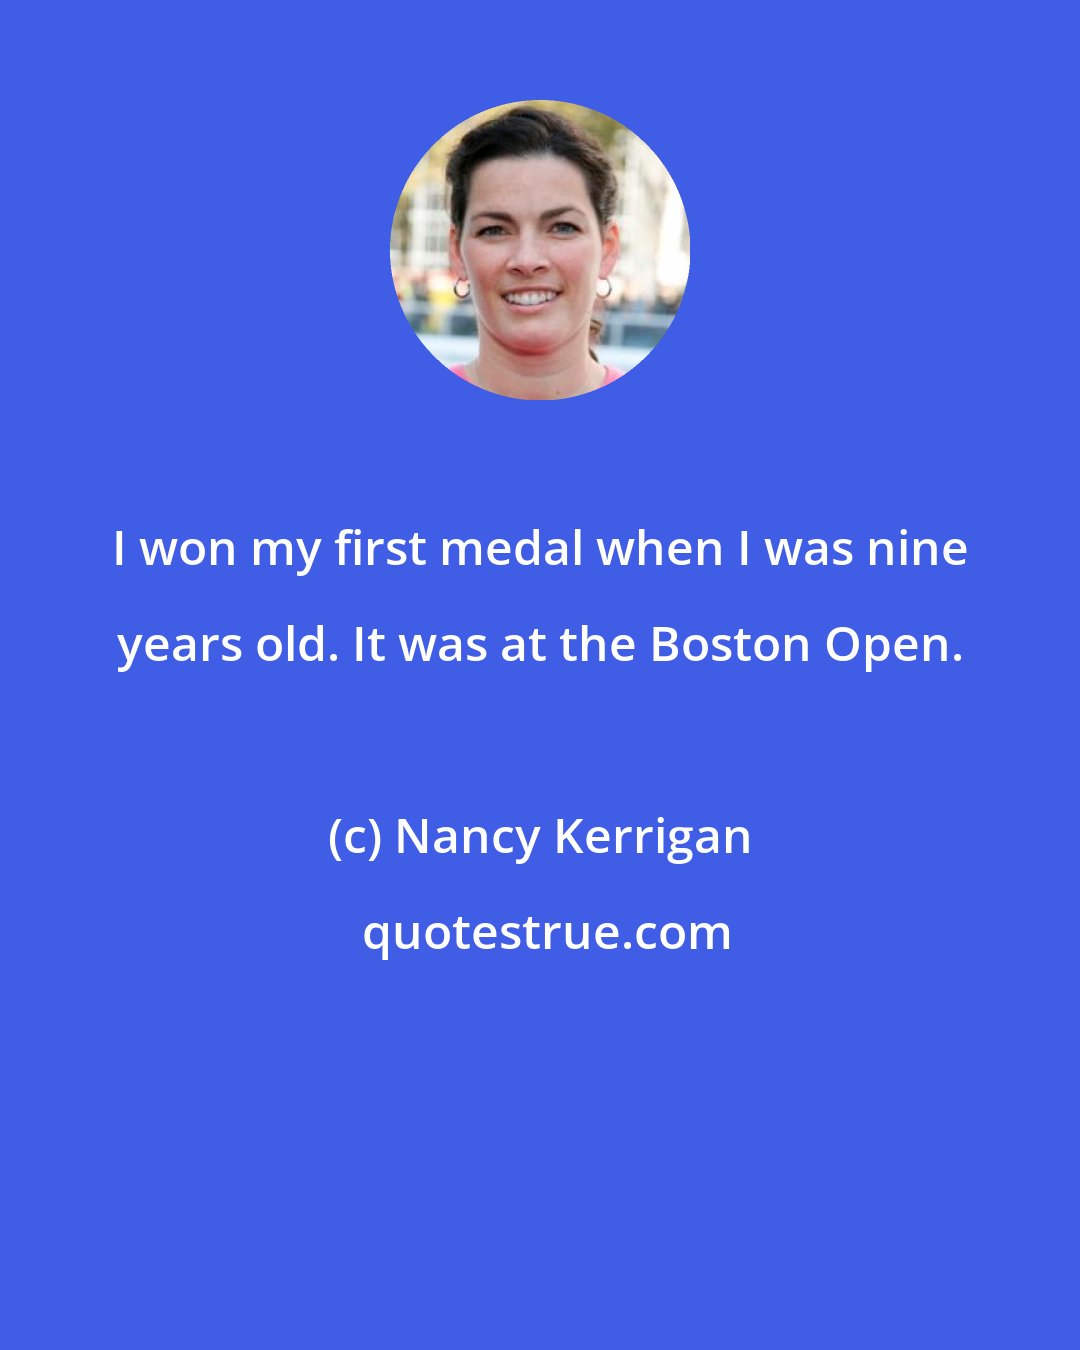 Nancy Kerrigan: I won my first medal when I was nine years old. It was at the Boston Open.